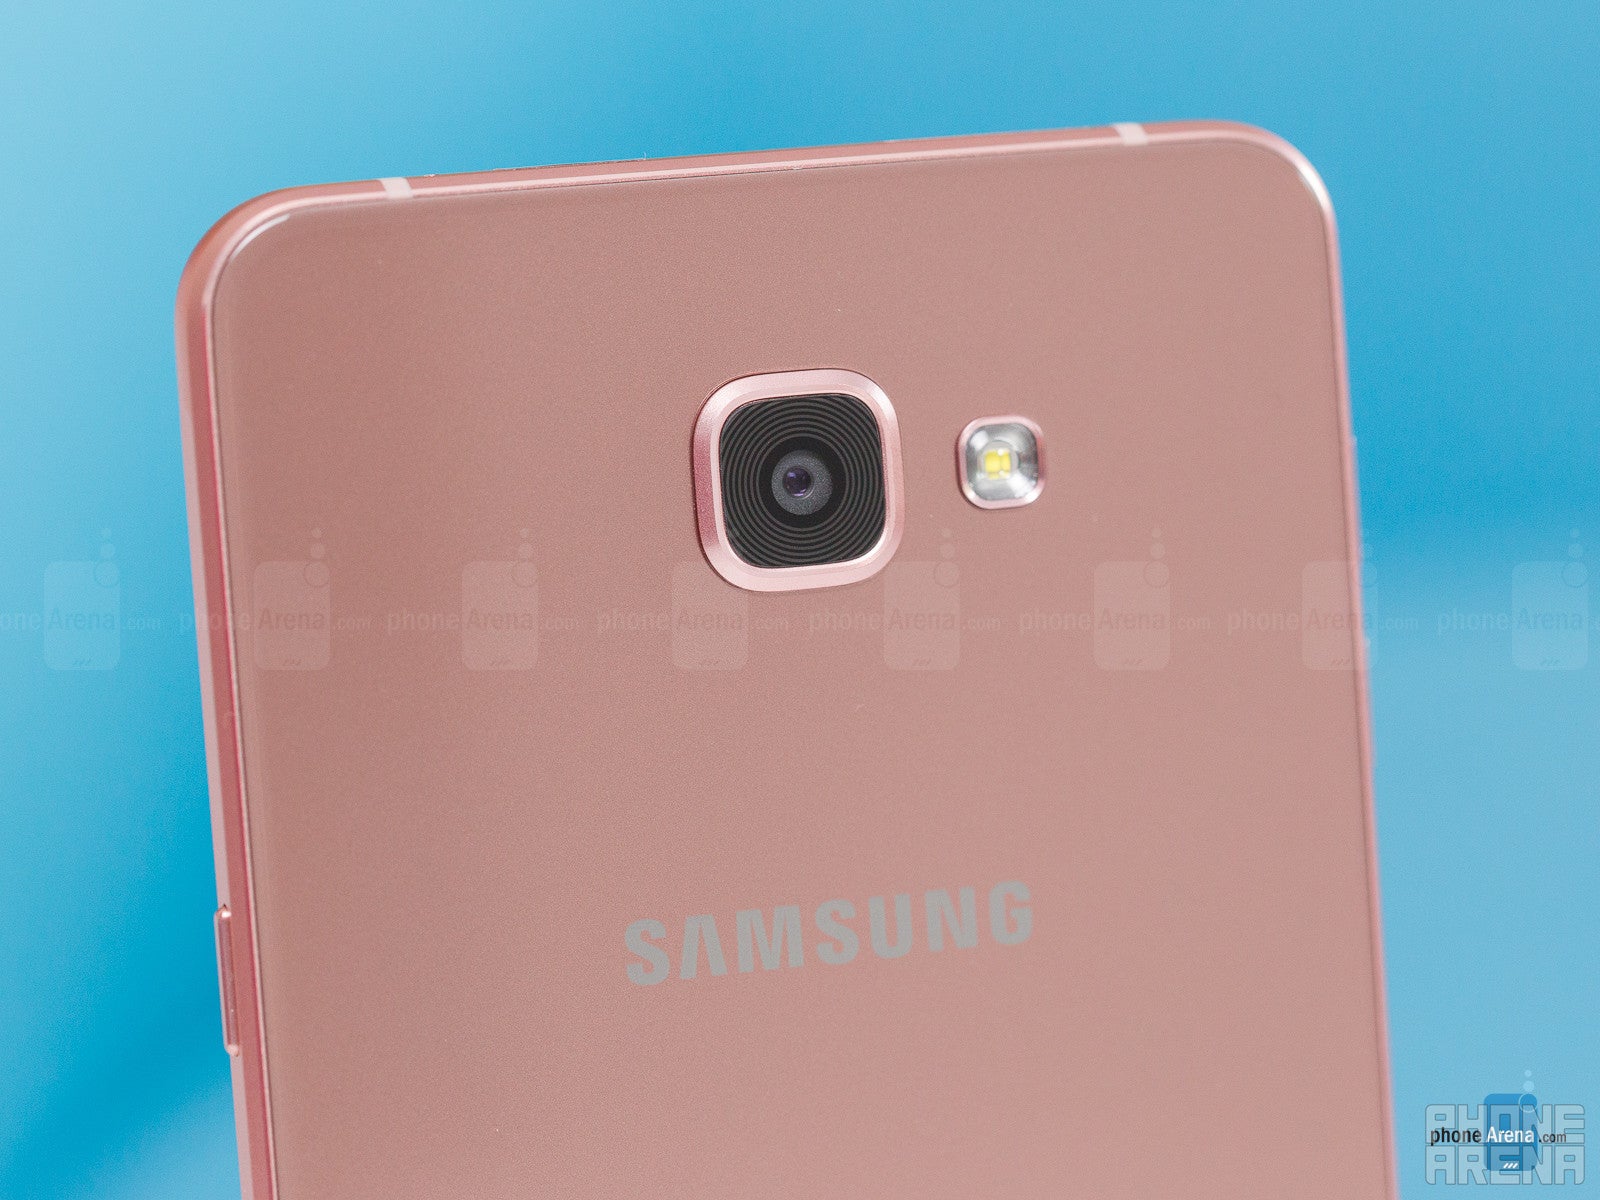 Samsung Galaxy A9 (2016) Review